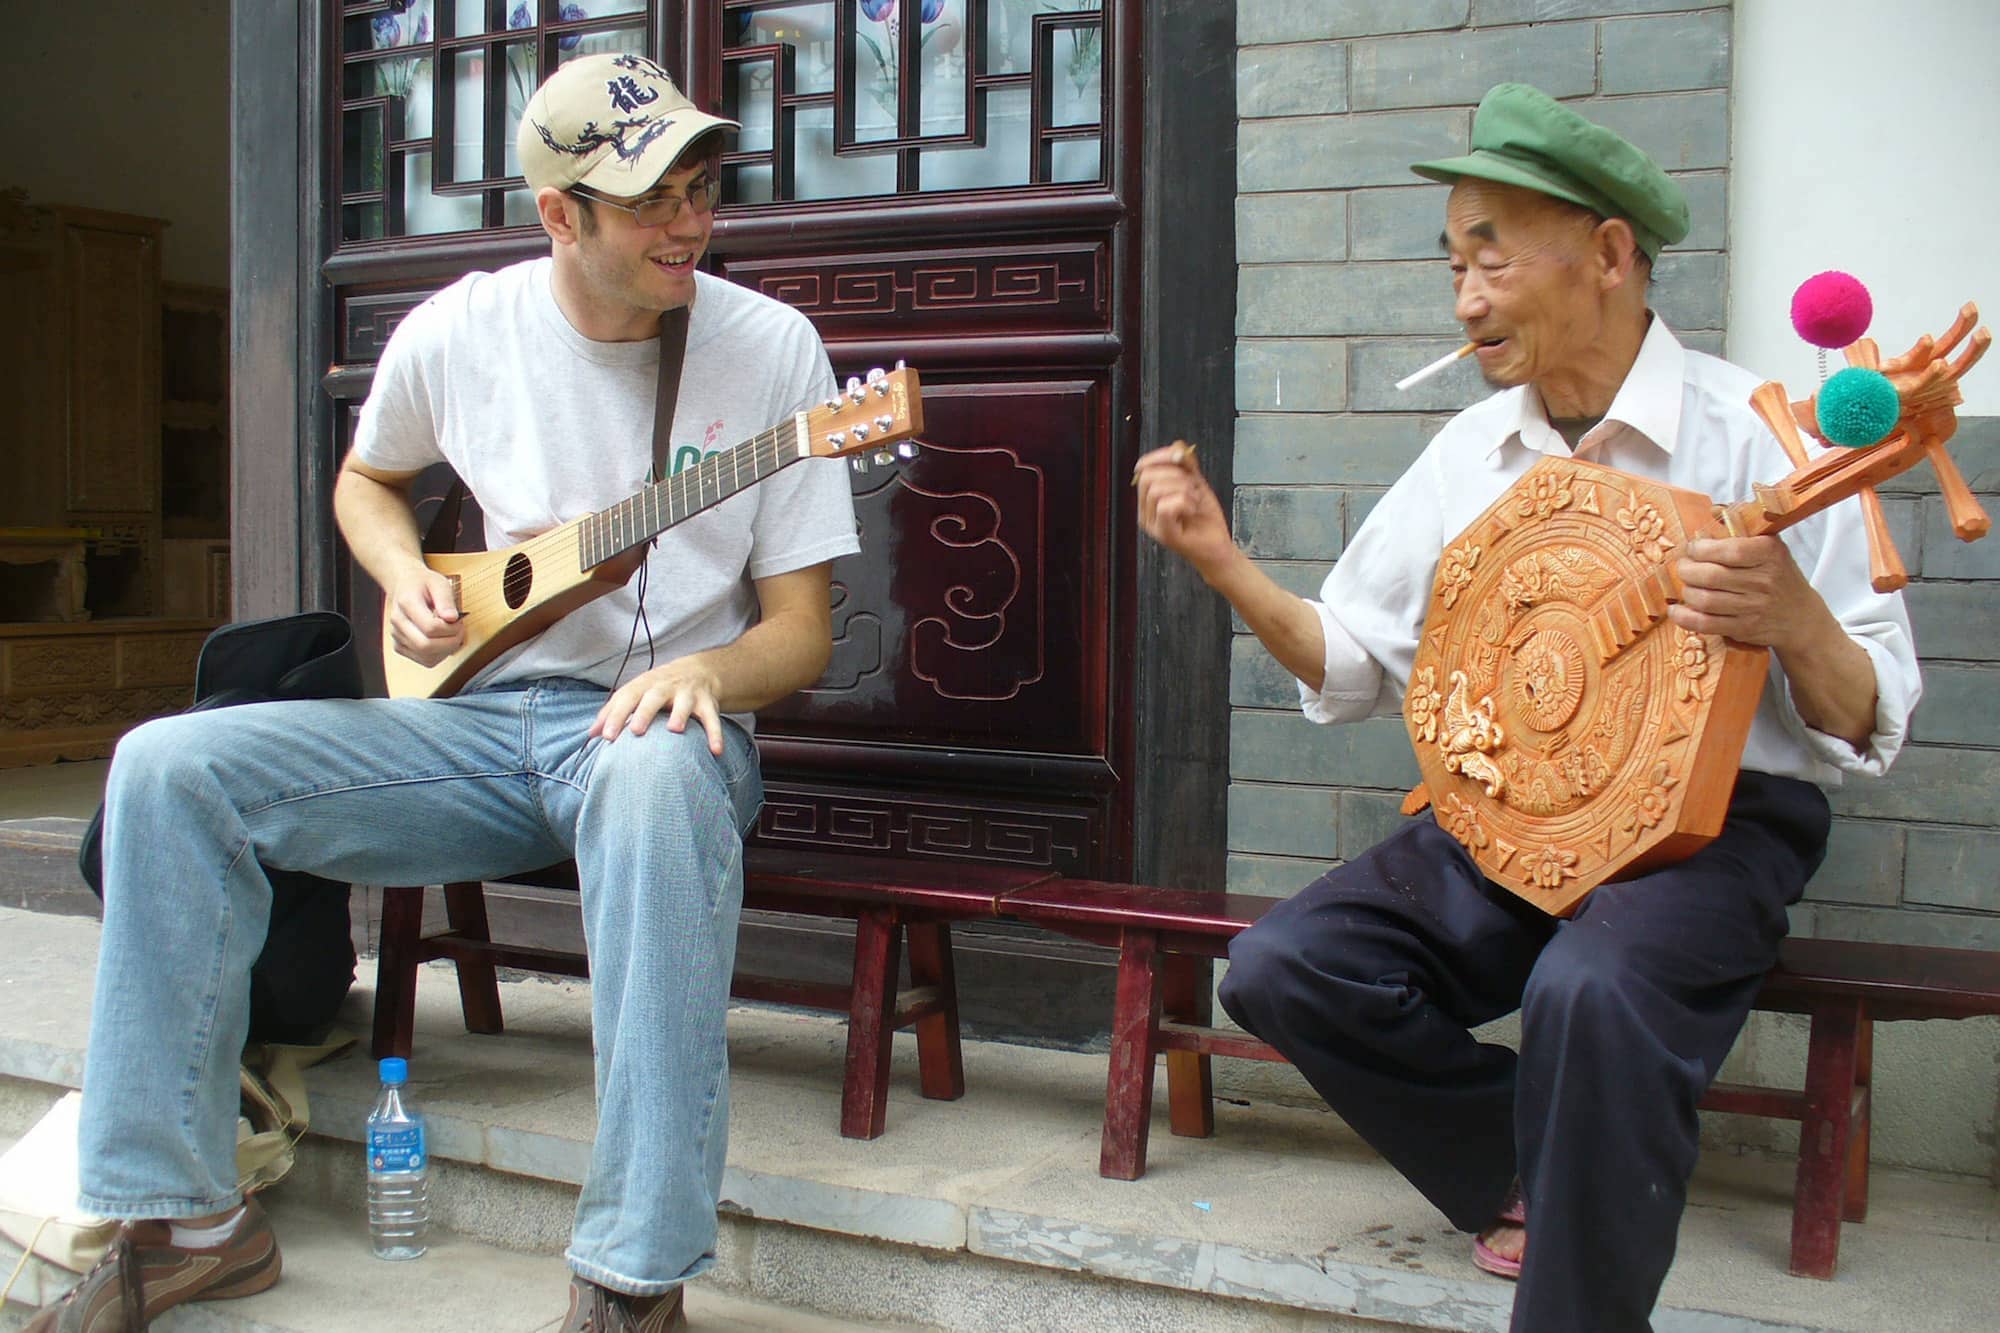 Two people of different ages sit holding unusual stringed instruments looking at each other.